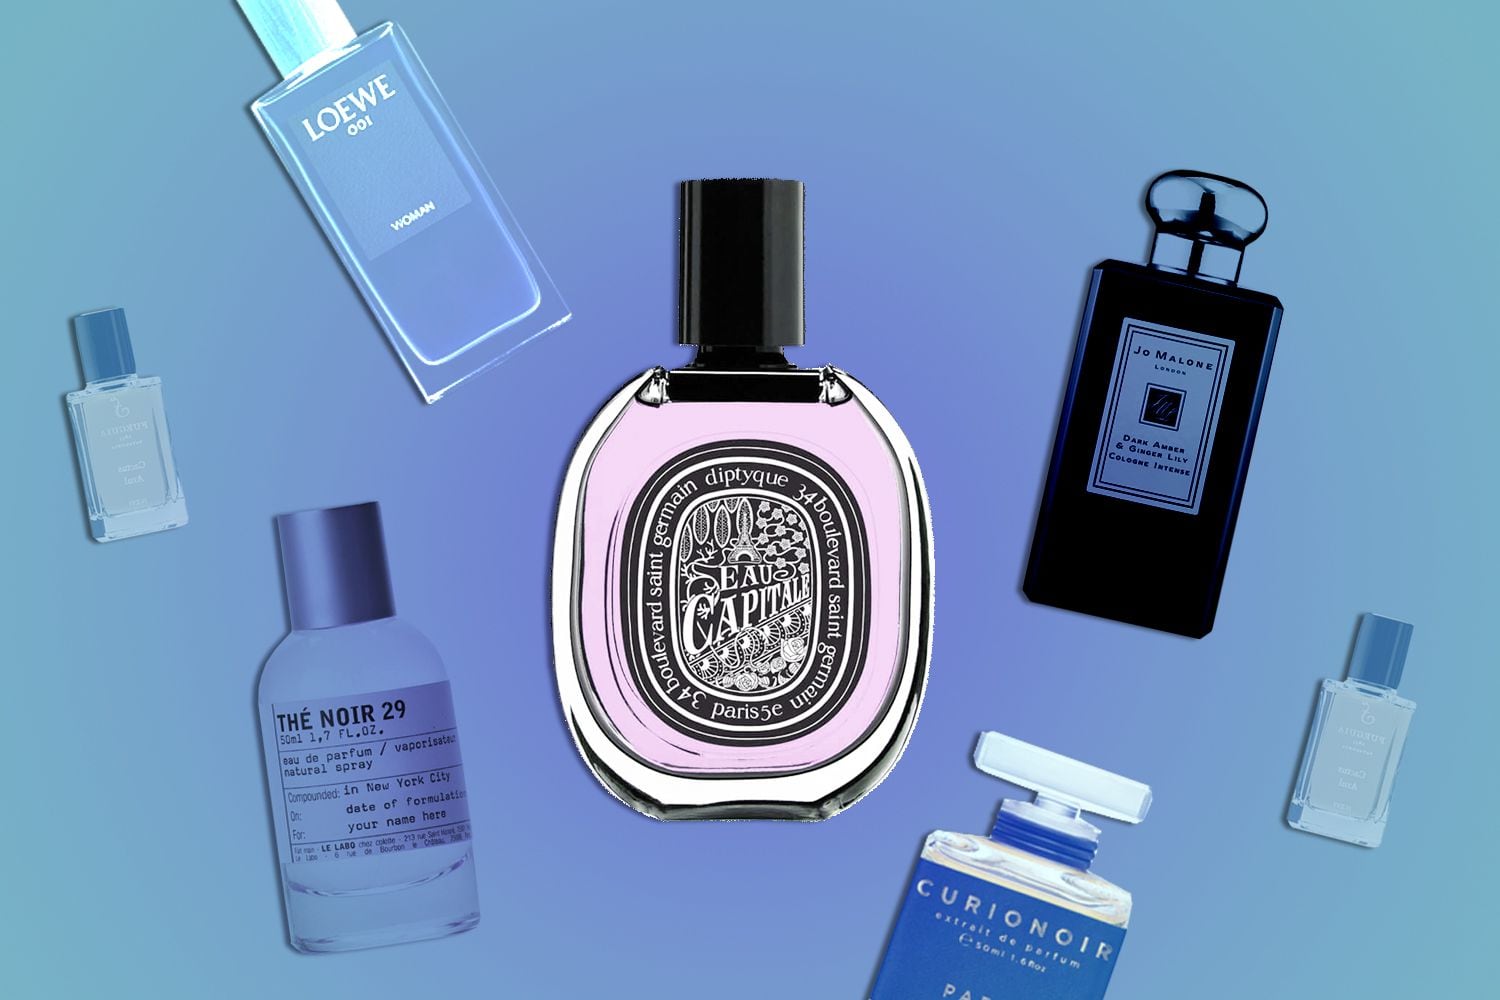 The 10 Best Fall Colognes for Men to Wear in 2023